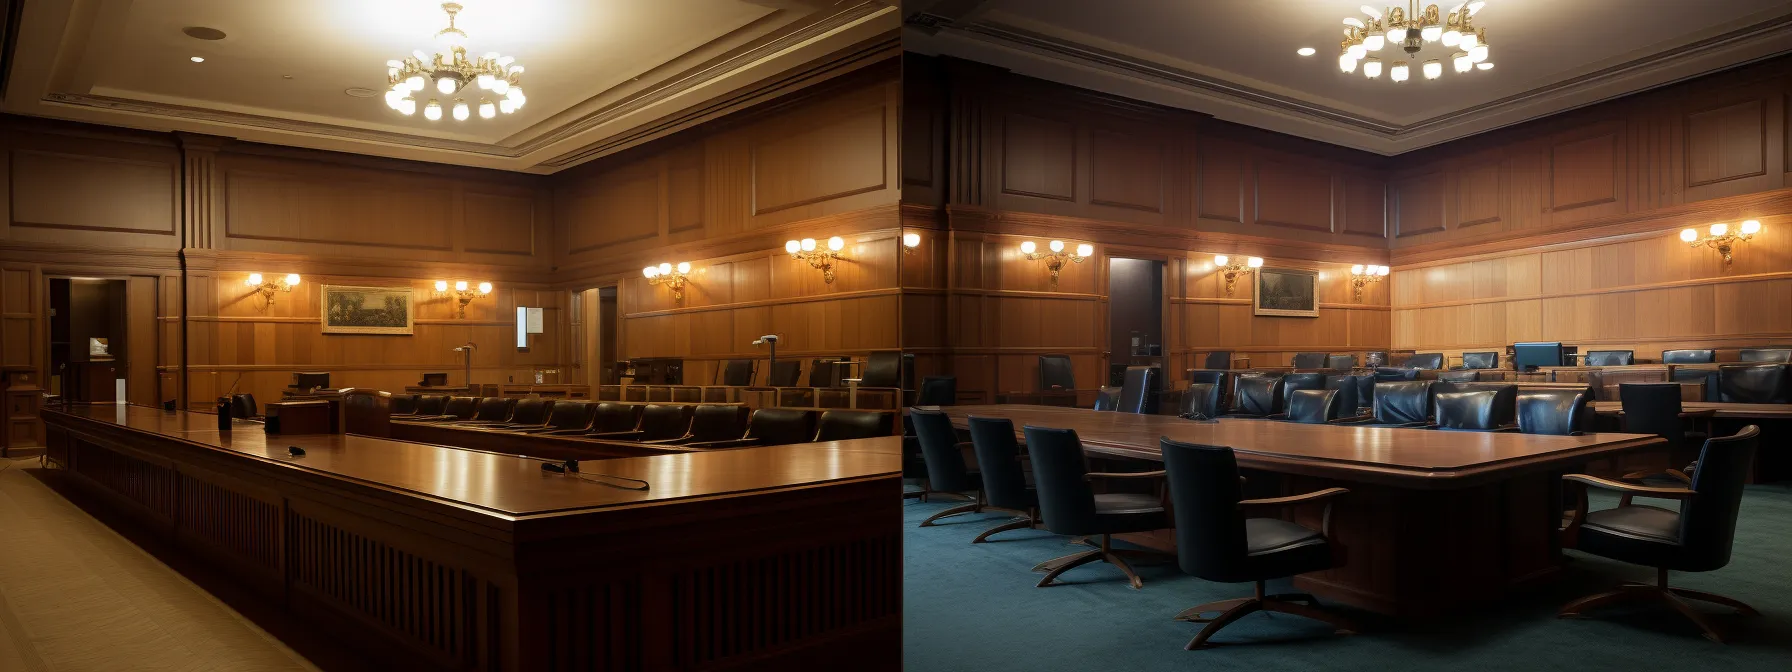 two courtrooms with different approaches to the act of state doctrine, one applying it strictly and the other challenging state actions, symbolizing the varying outcomes of international legal disputes.